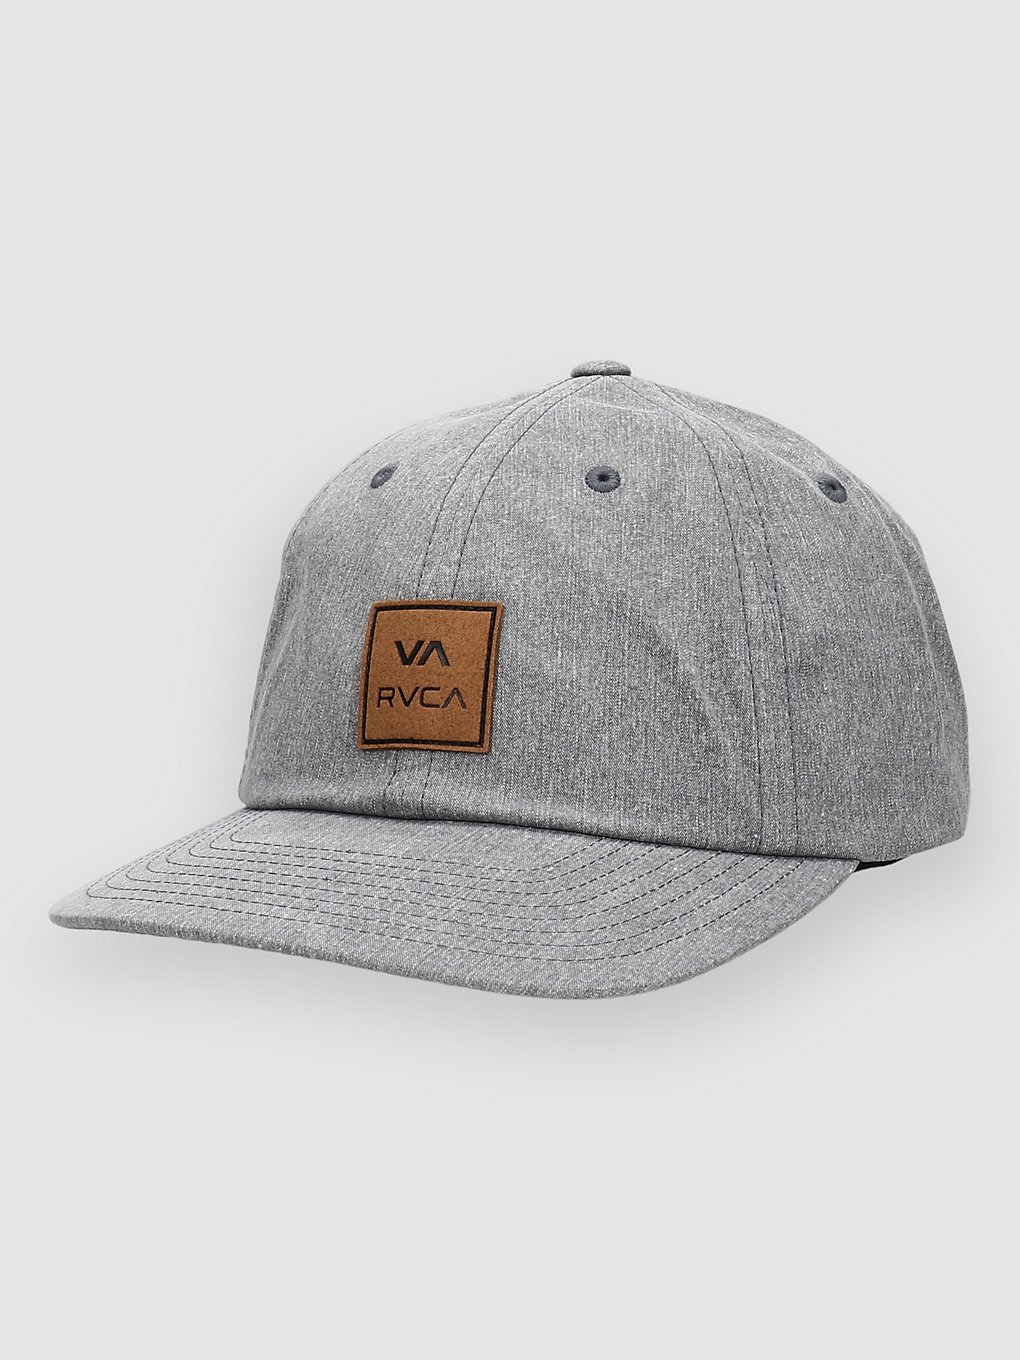 RVCA Atw Washed Casquette noir